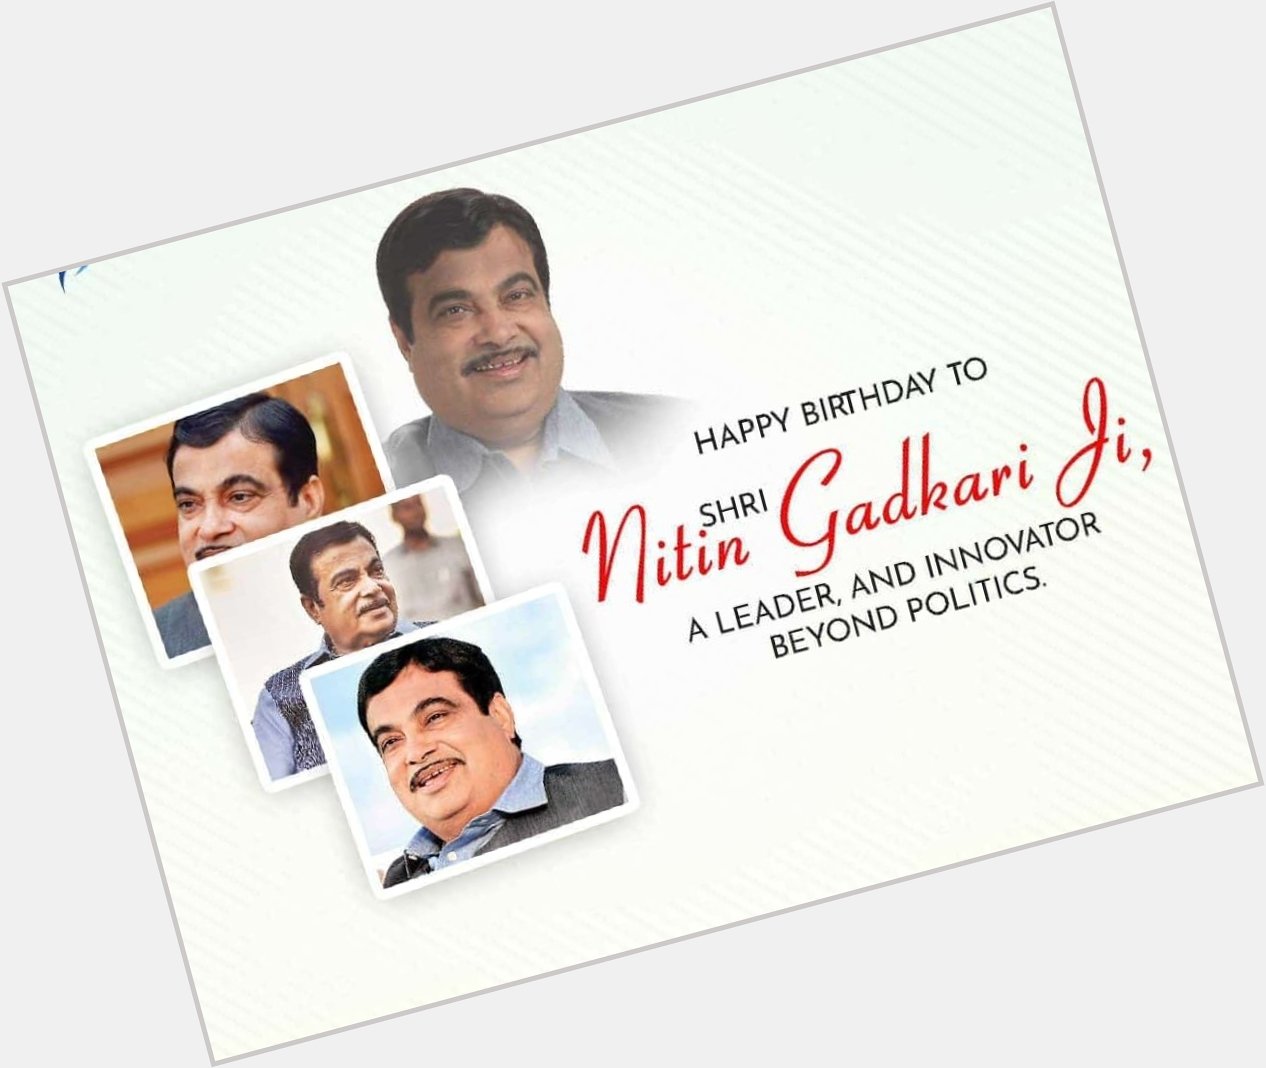  sir , We wish you Happy Birthday to you and many more happy returns of the day. 